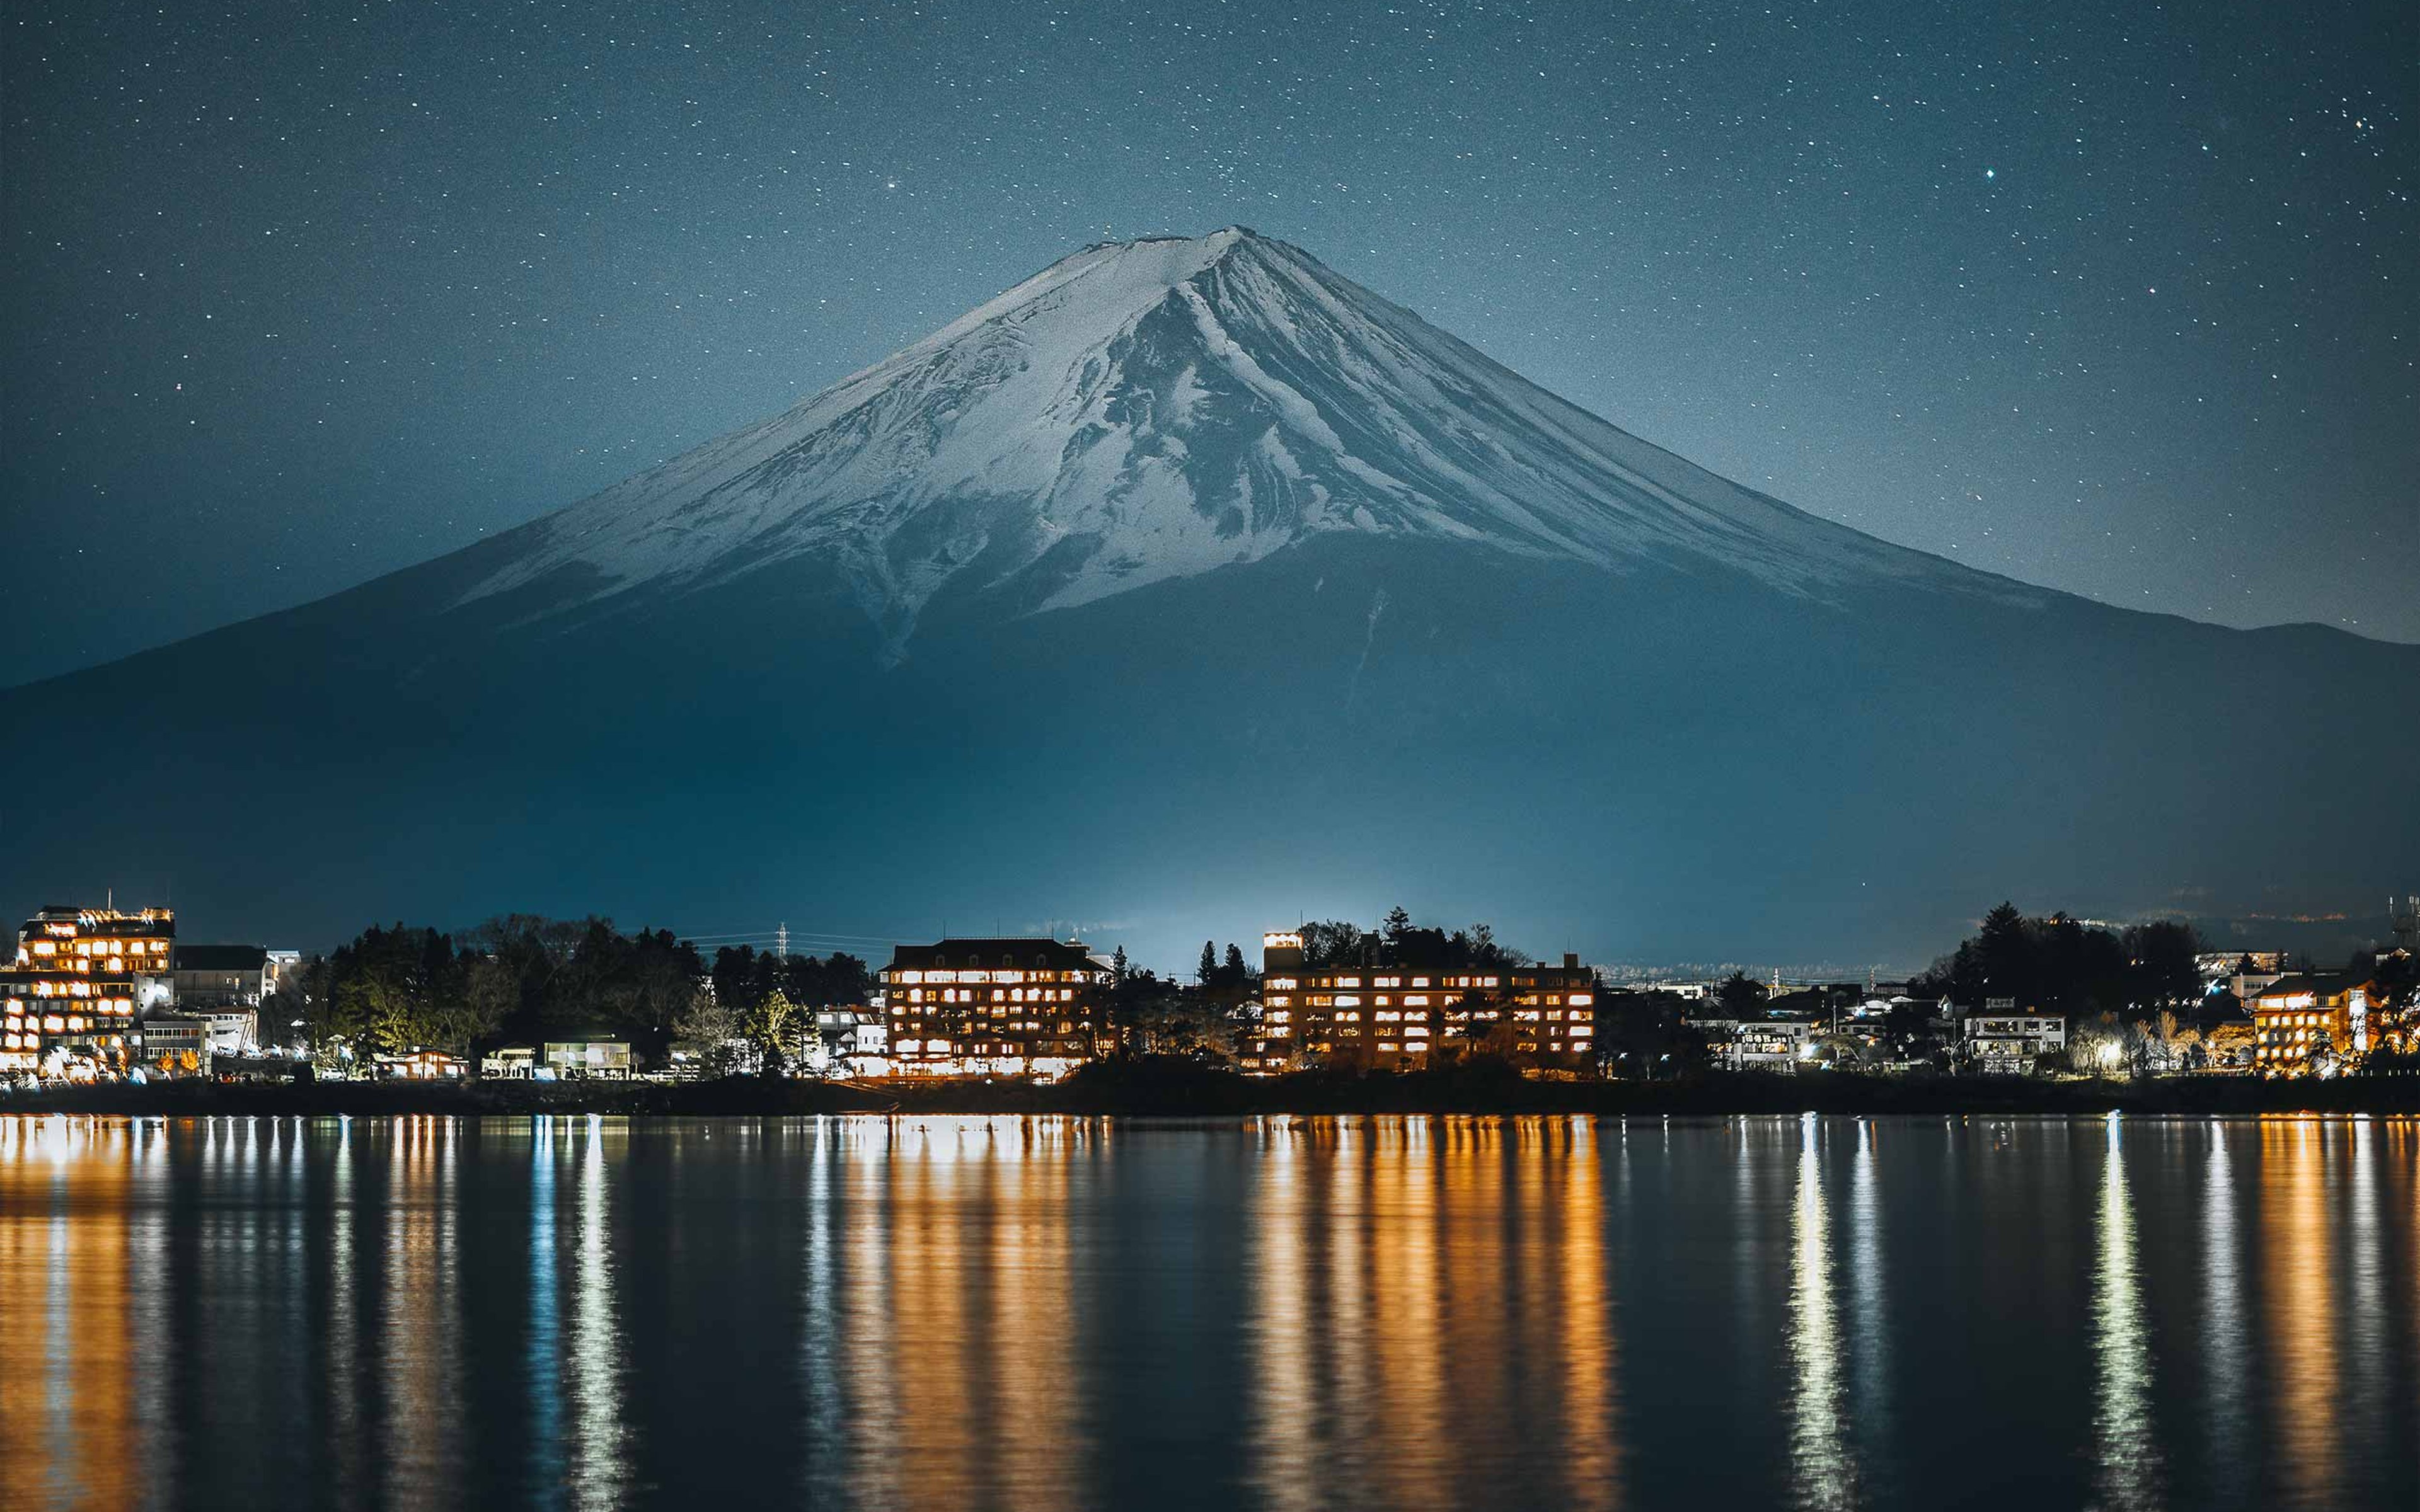 Landscape view of Mount Fuji at night with a starlit sky.